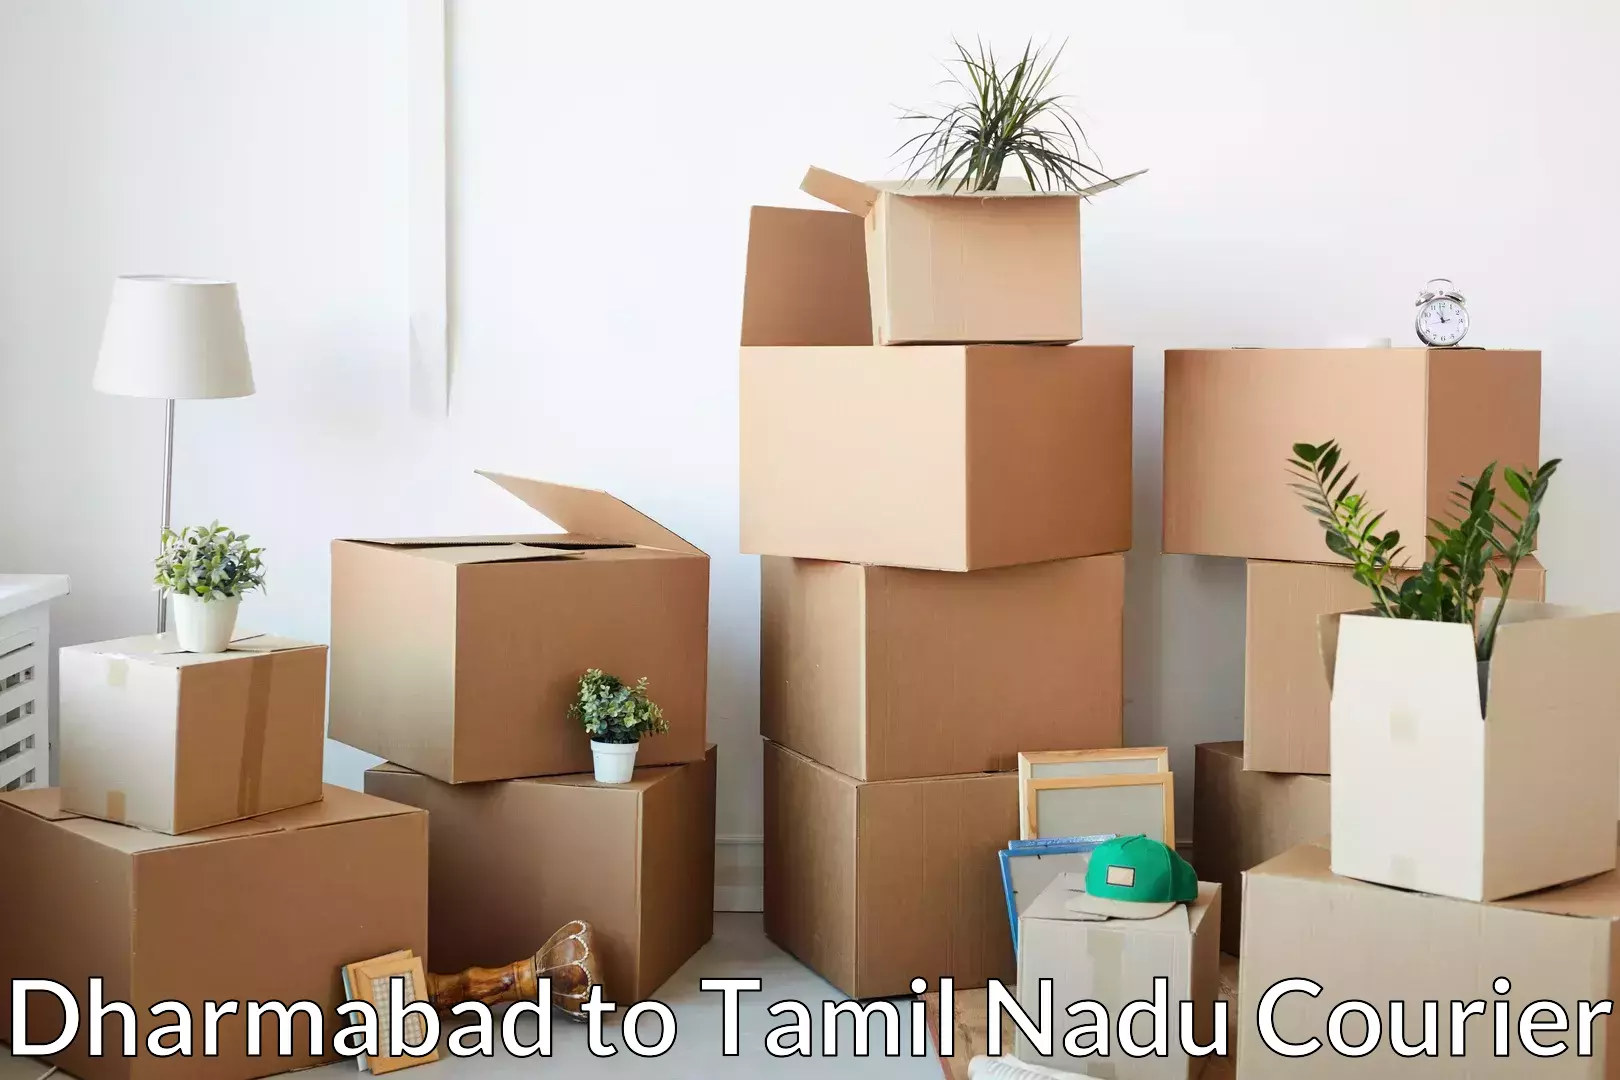 Furniture relocation experts Dharmabad to Tirunelveli